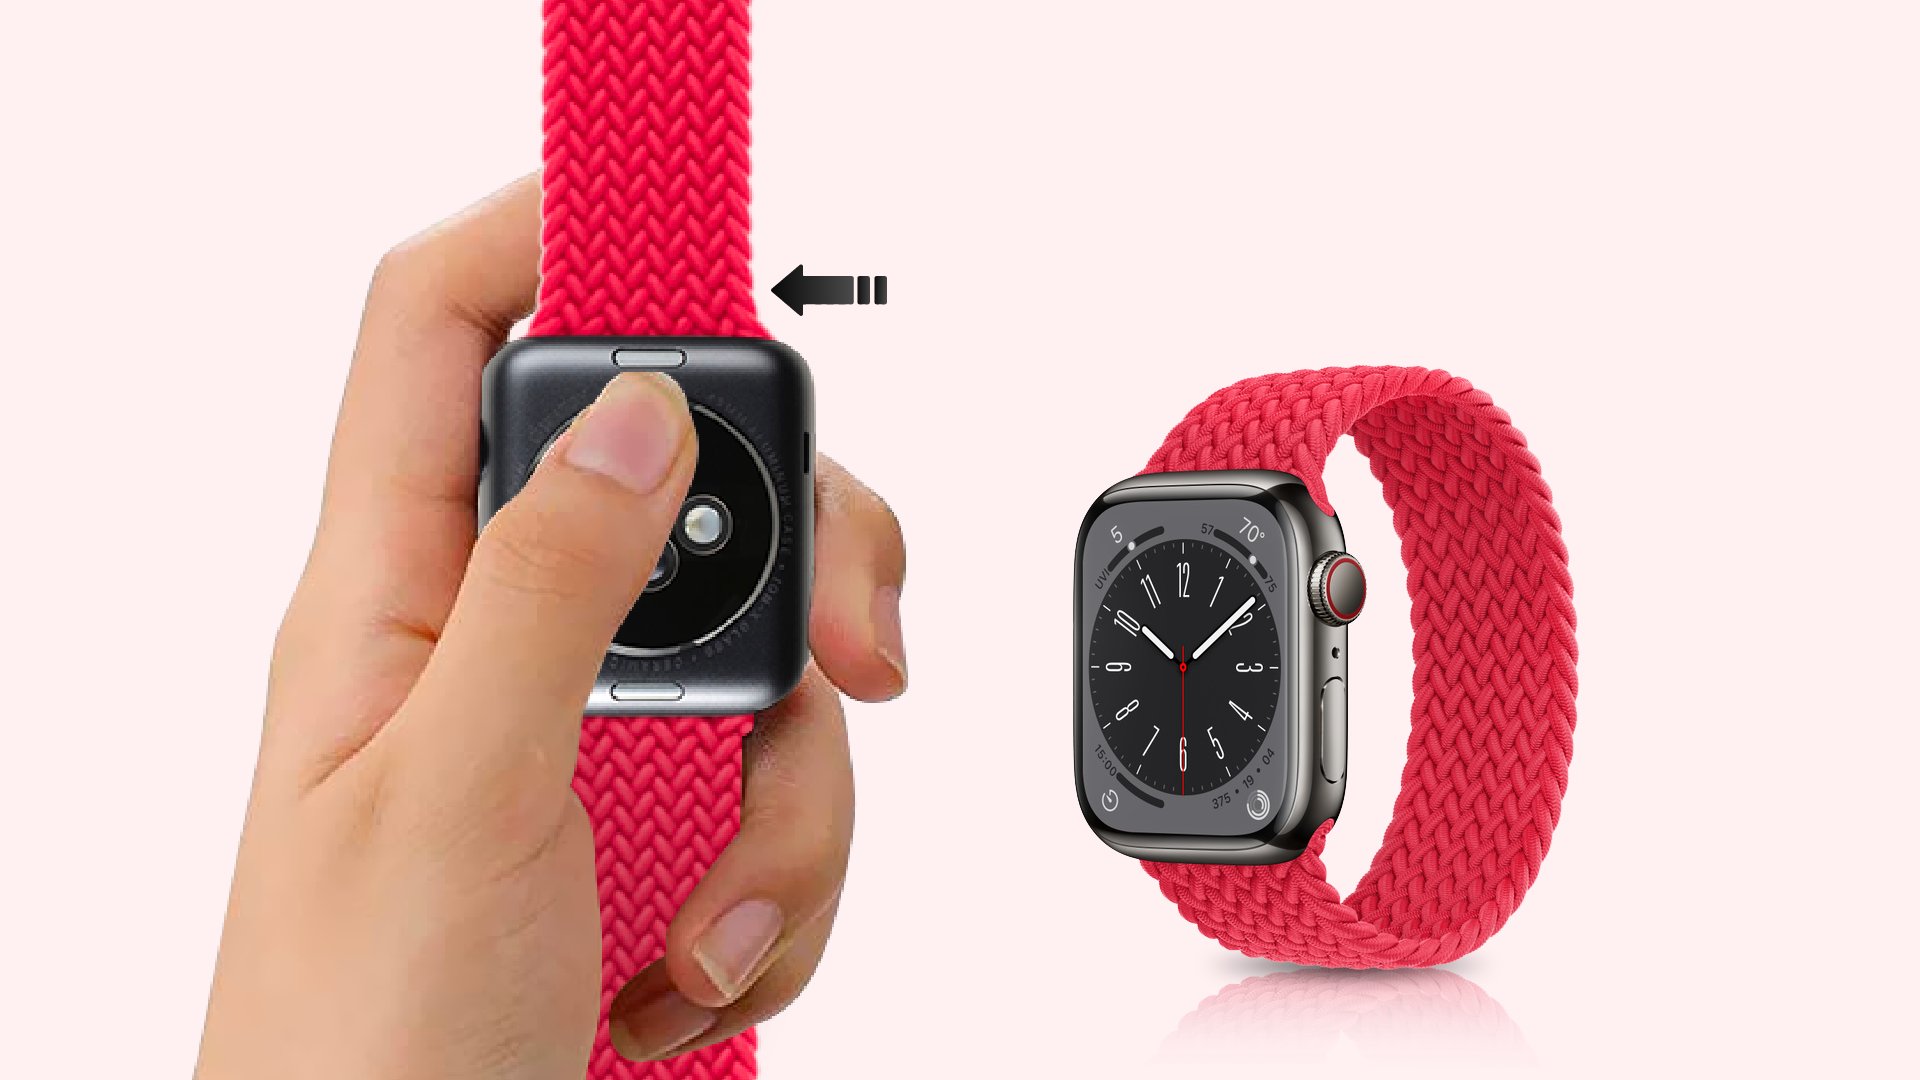  How to Slide the new strap onto the Apple Watch